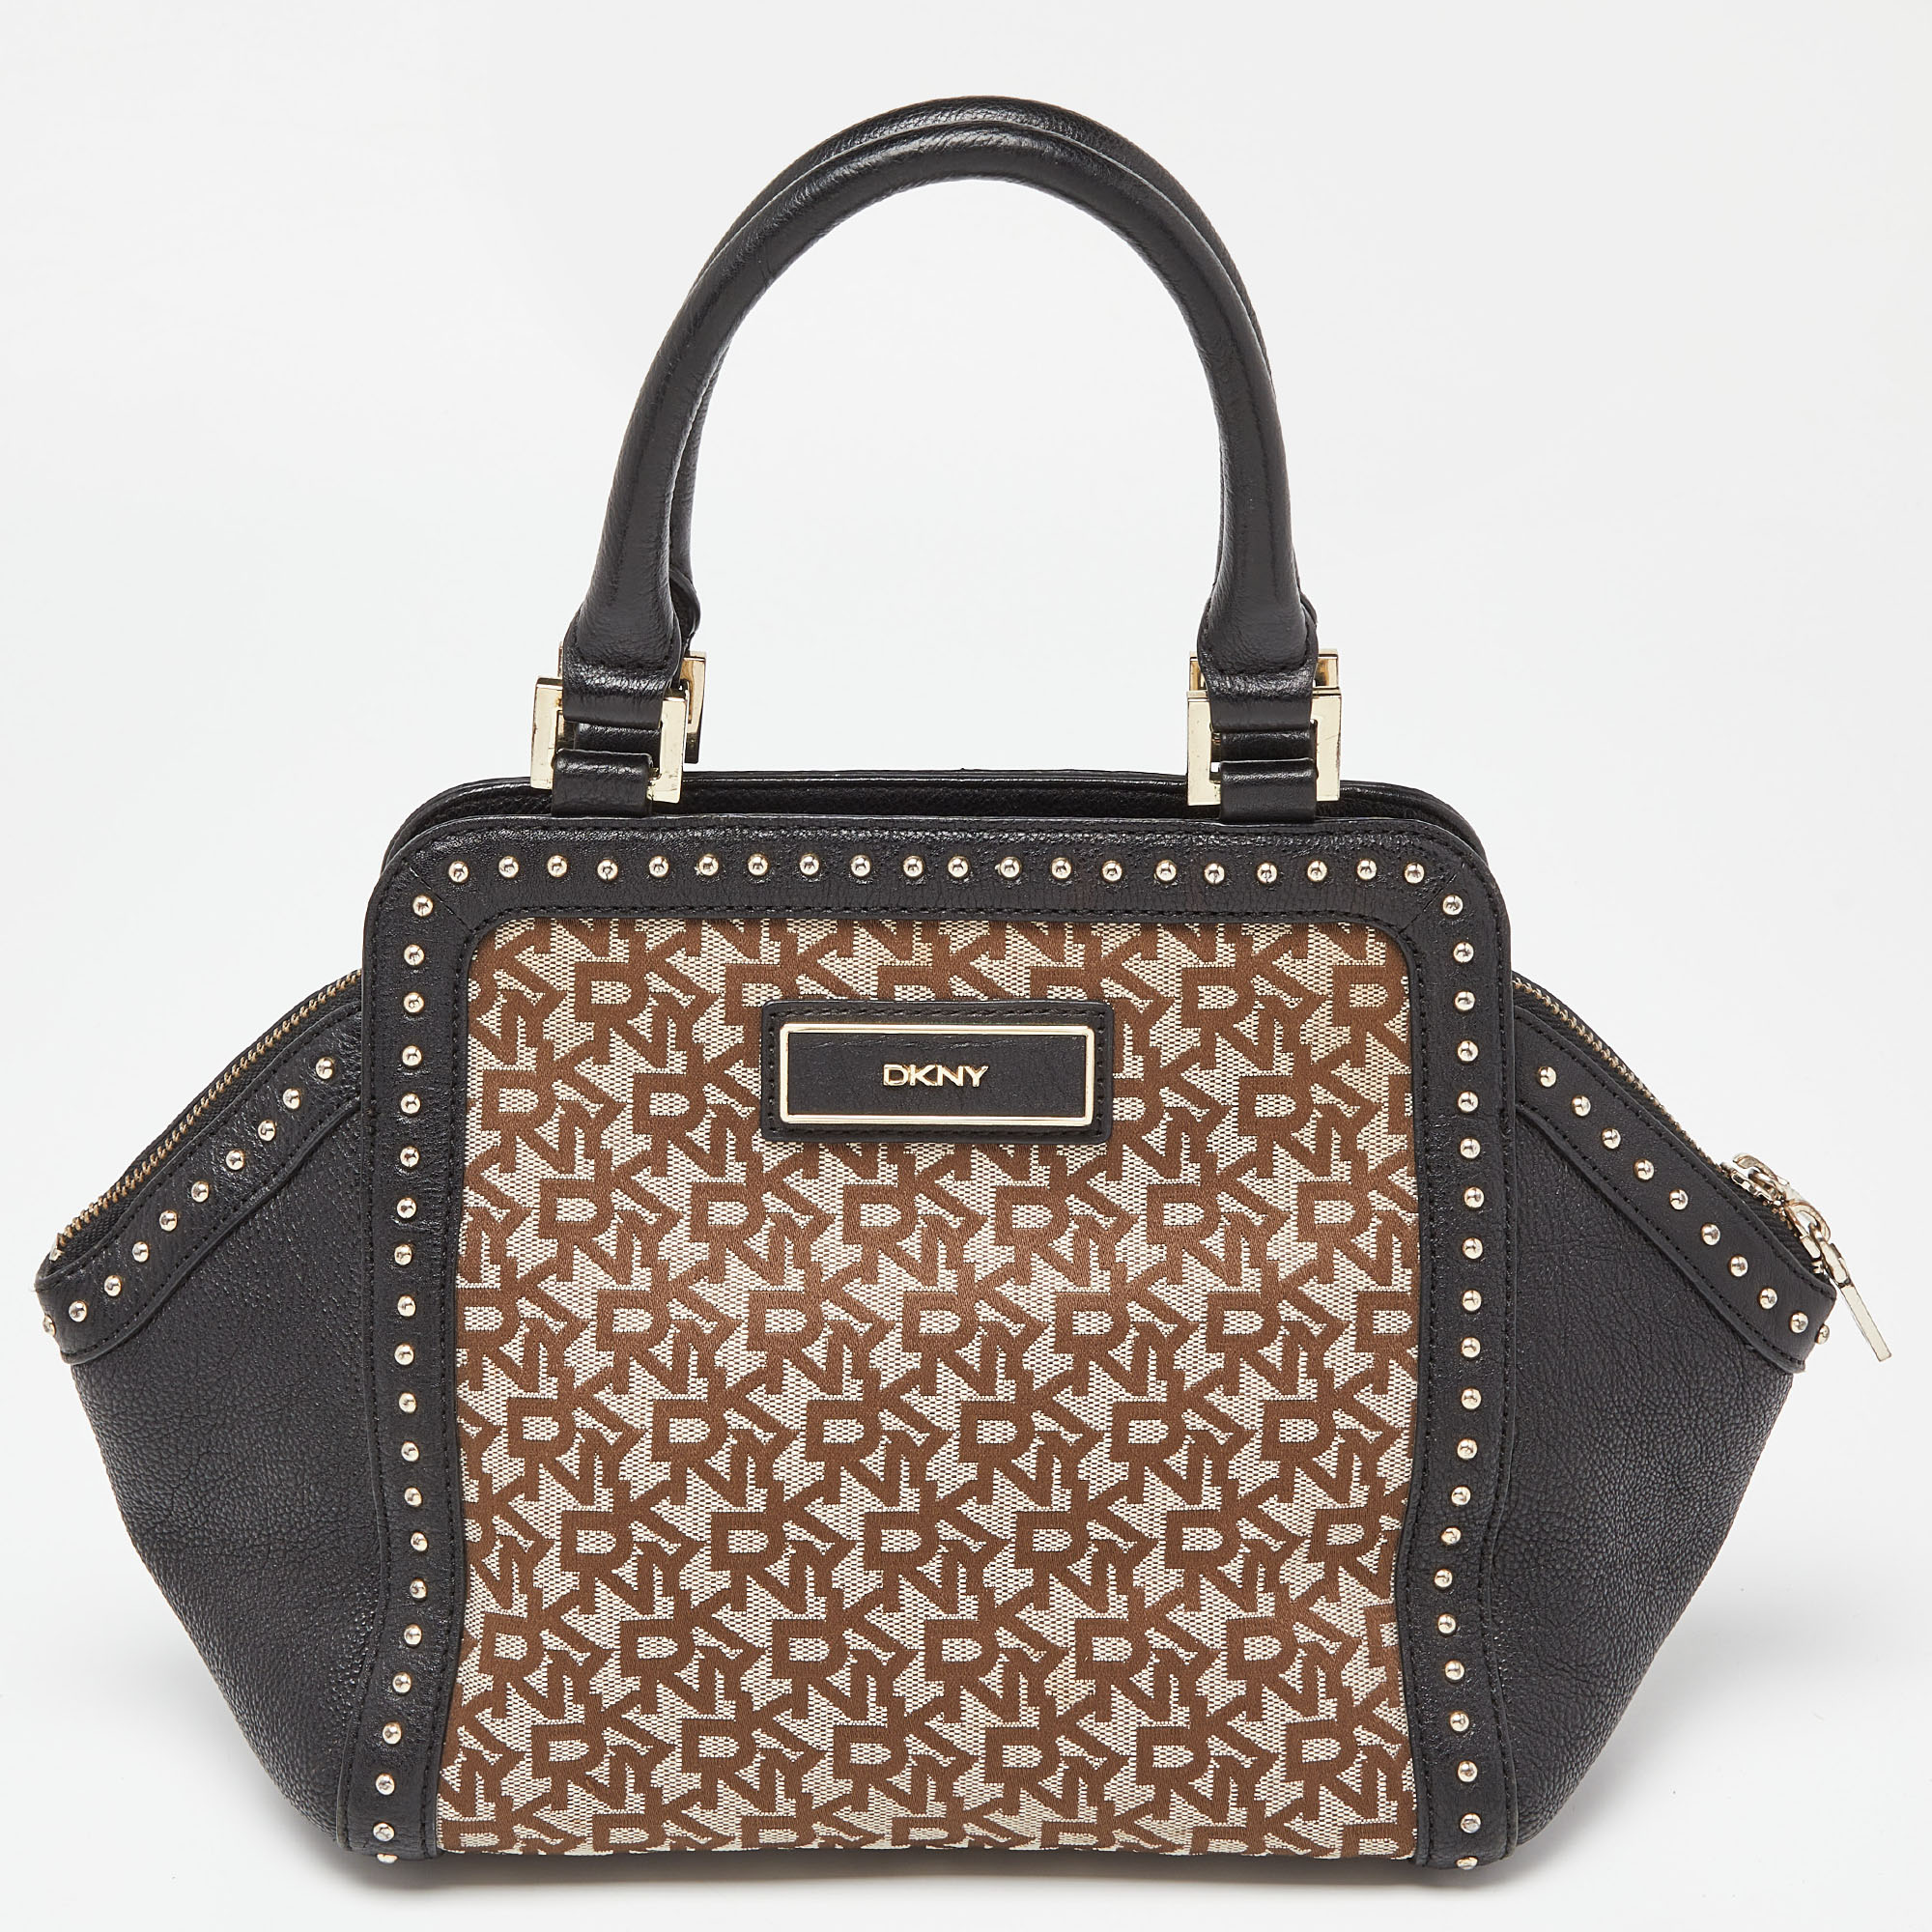 

DKNY Beige/Black Signature Canvas and Leather Studded Satchel